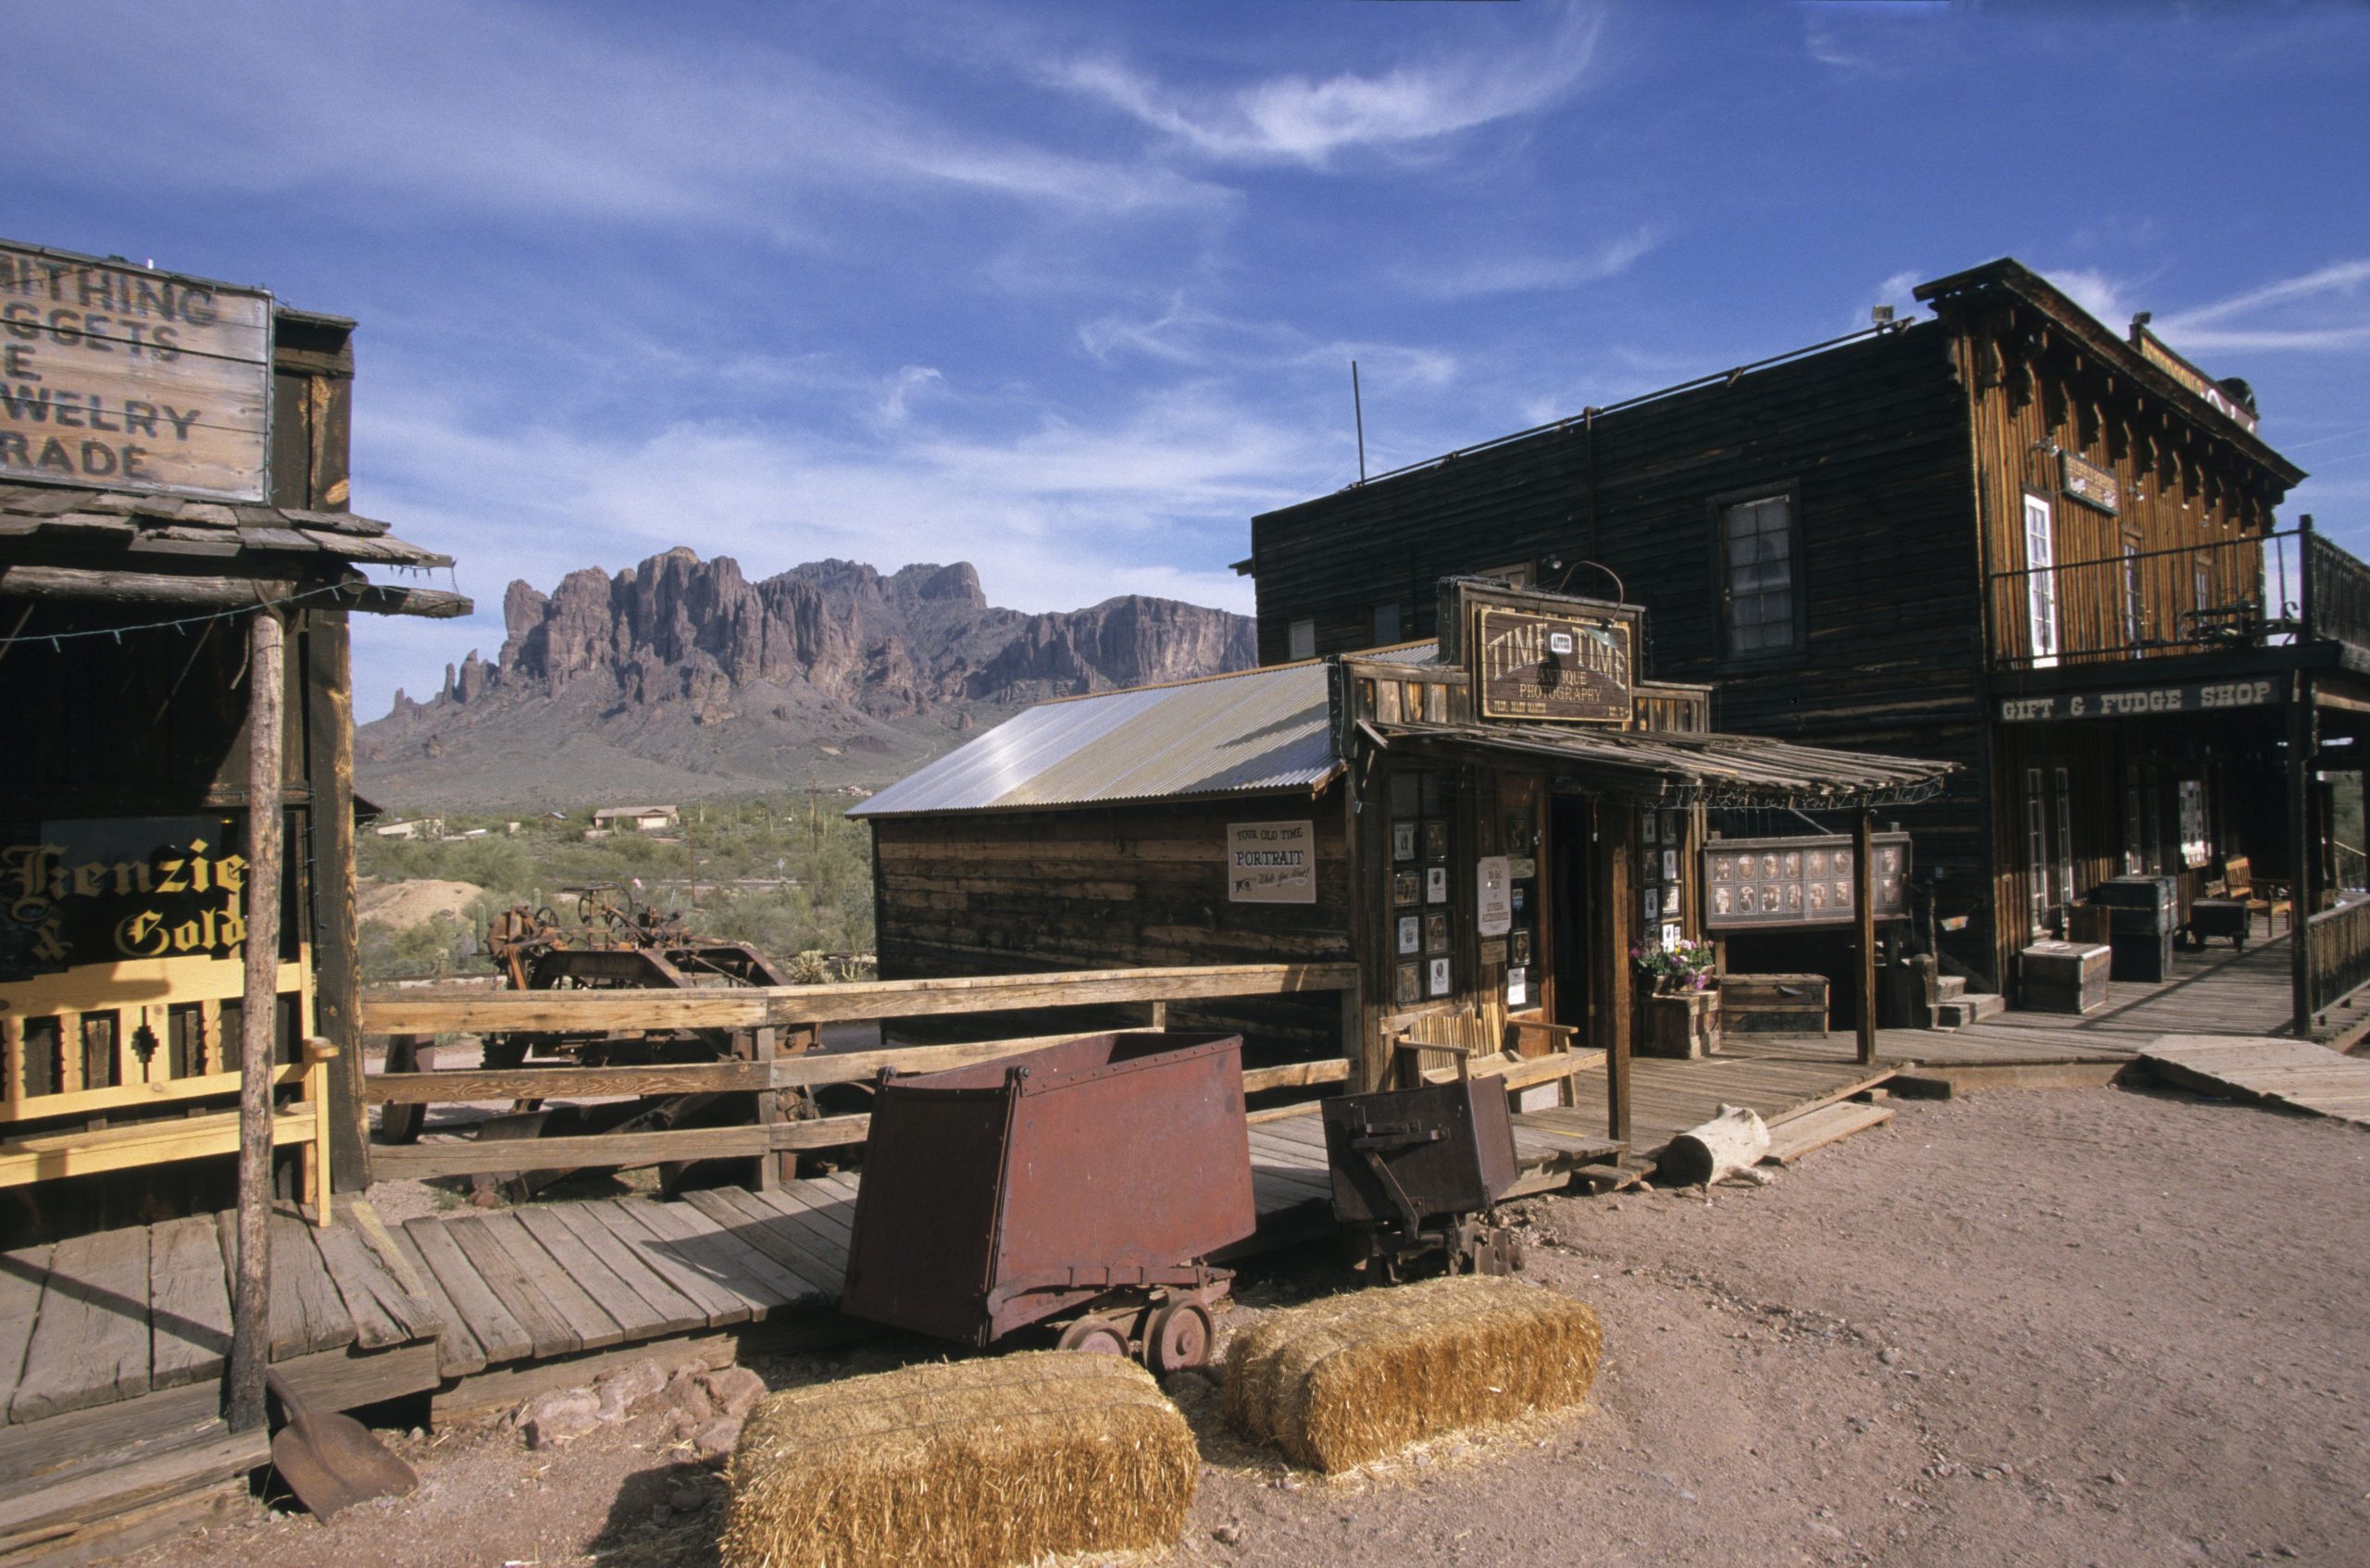 <p><a href="https://www.tripadvisor.com/Attraction_Review-g29033-d116634-Reviews-Goldfield_Ghost_Town-Apache_Junction_Arizona.html" rel="noopener">This reconstructed 1890s town</a> includes gold-mine tours, Old West gunfights and a history museum, plus tons of other attractions at this hidden gem, including zip lining. The town is open daily, but certain attractions have specific hours. It's makes for a great stop along a Western-themed <a href="https://www.rd.com/list/affordable-family-vacations/" rel="noopener">cheap family vacation</a>!</p> <p class="listicle-page__cta-button-shop"><a class="shop-btn" href="https://www.tripadvisor.com/Attraction_Review-g29033-d116634-Reviews-Goldfield_Ghost_Town-Apache_Junction_Arizona.html">Learn More</a></p>